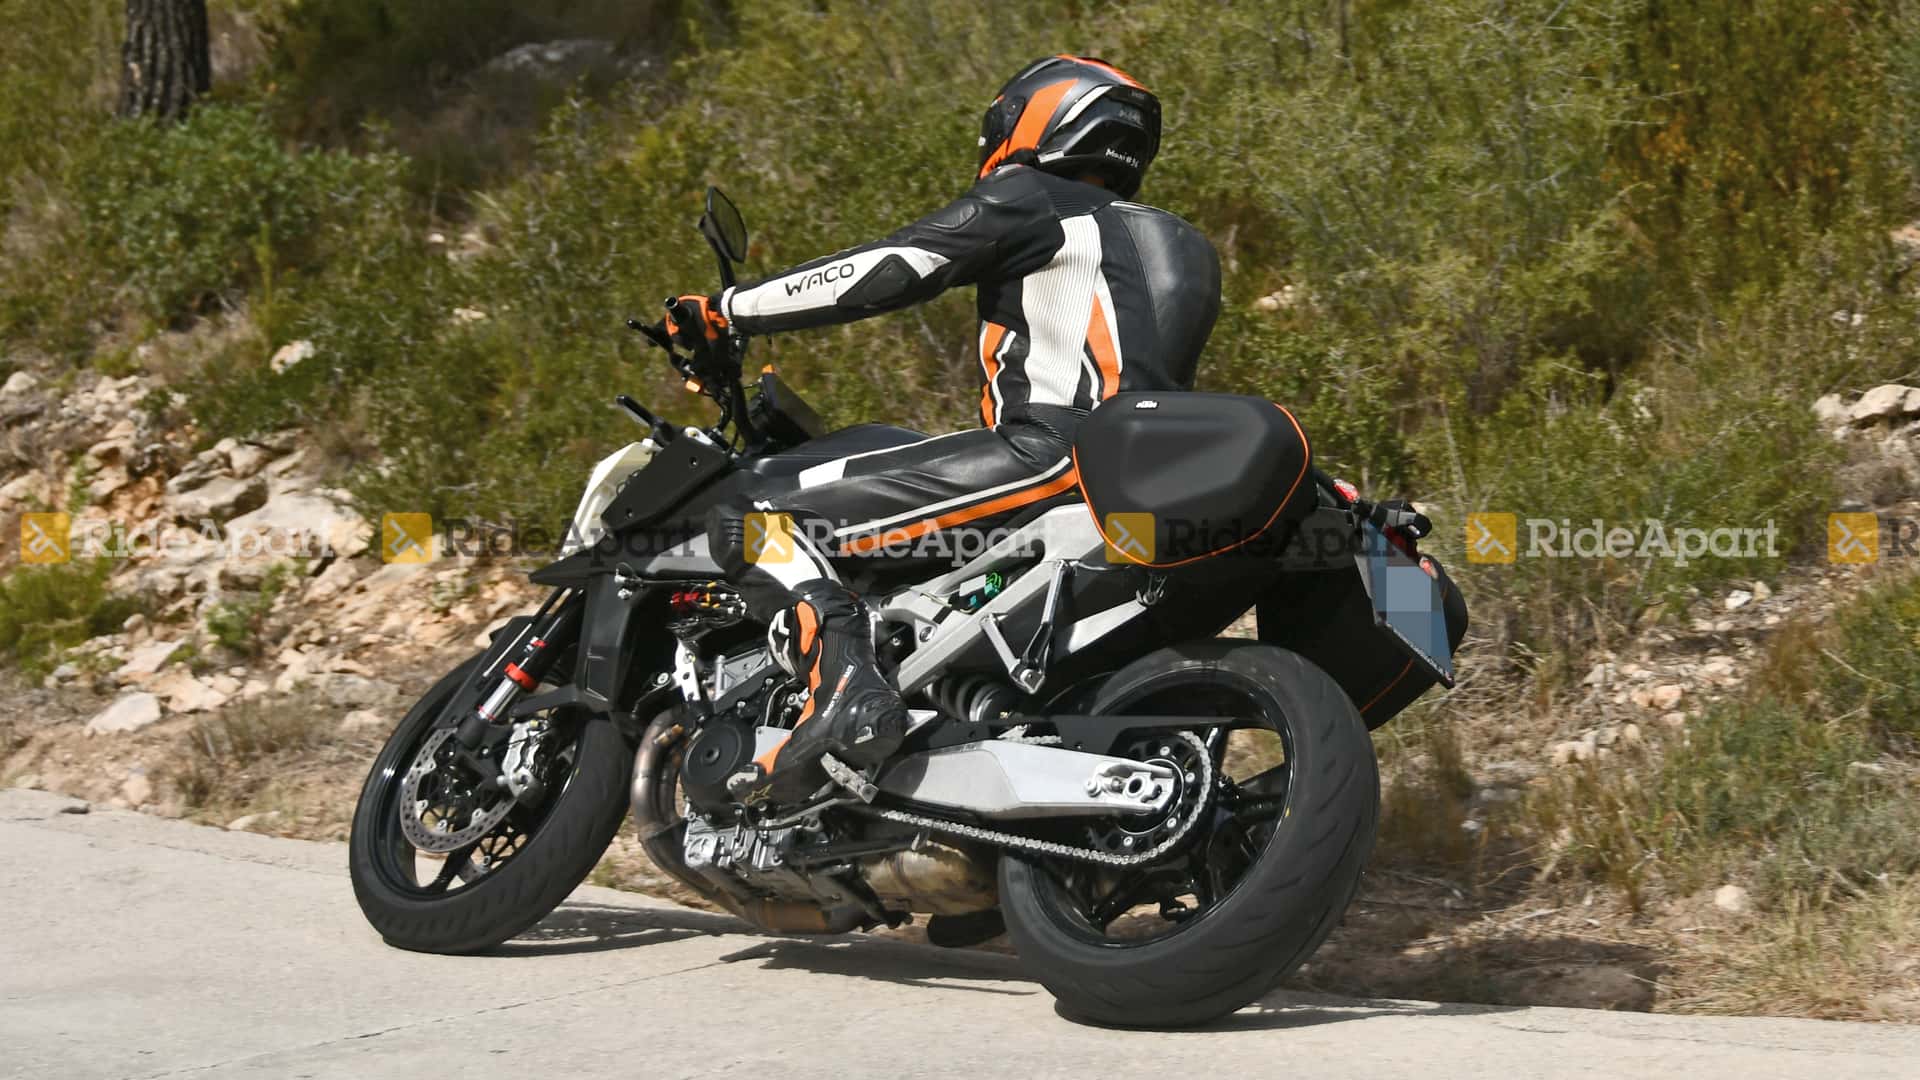 New KTM Duke 990 Spotted Testing - Coming To India? - landscape